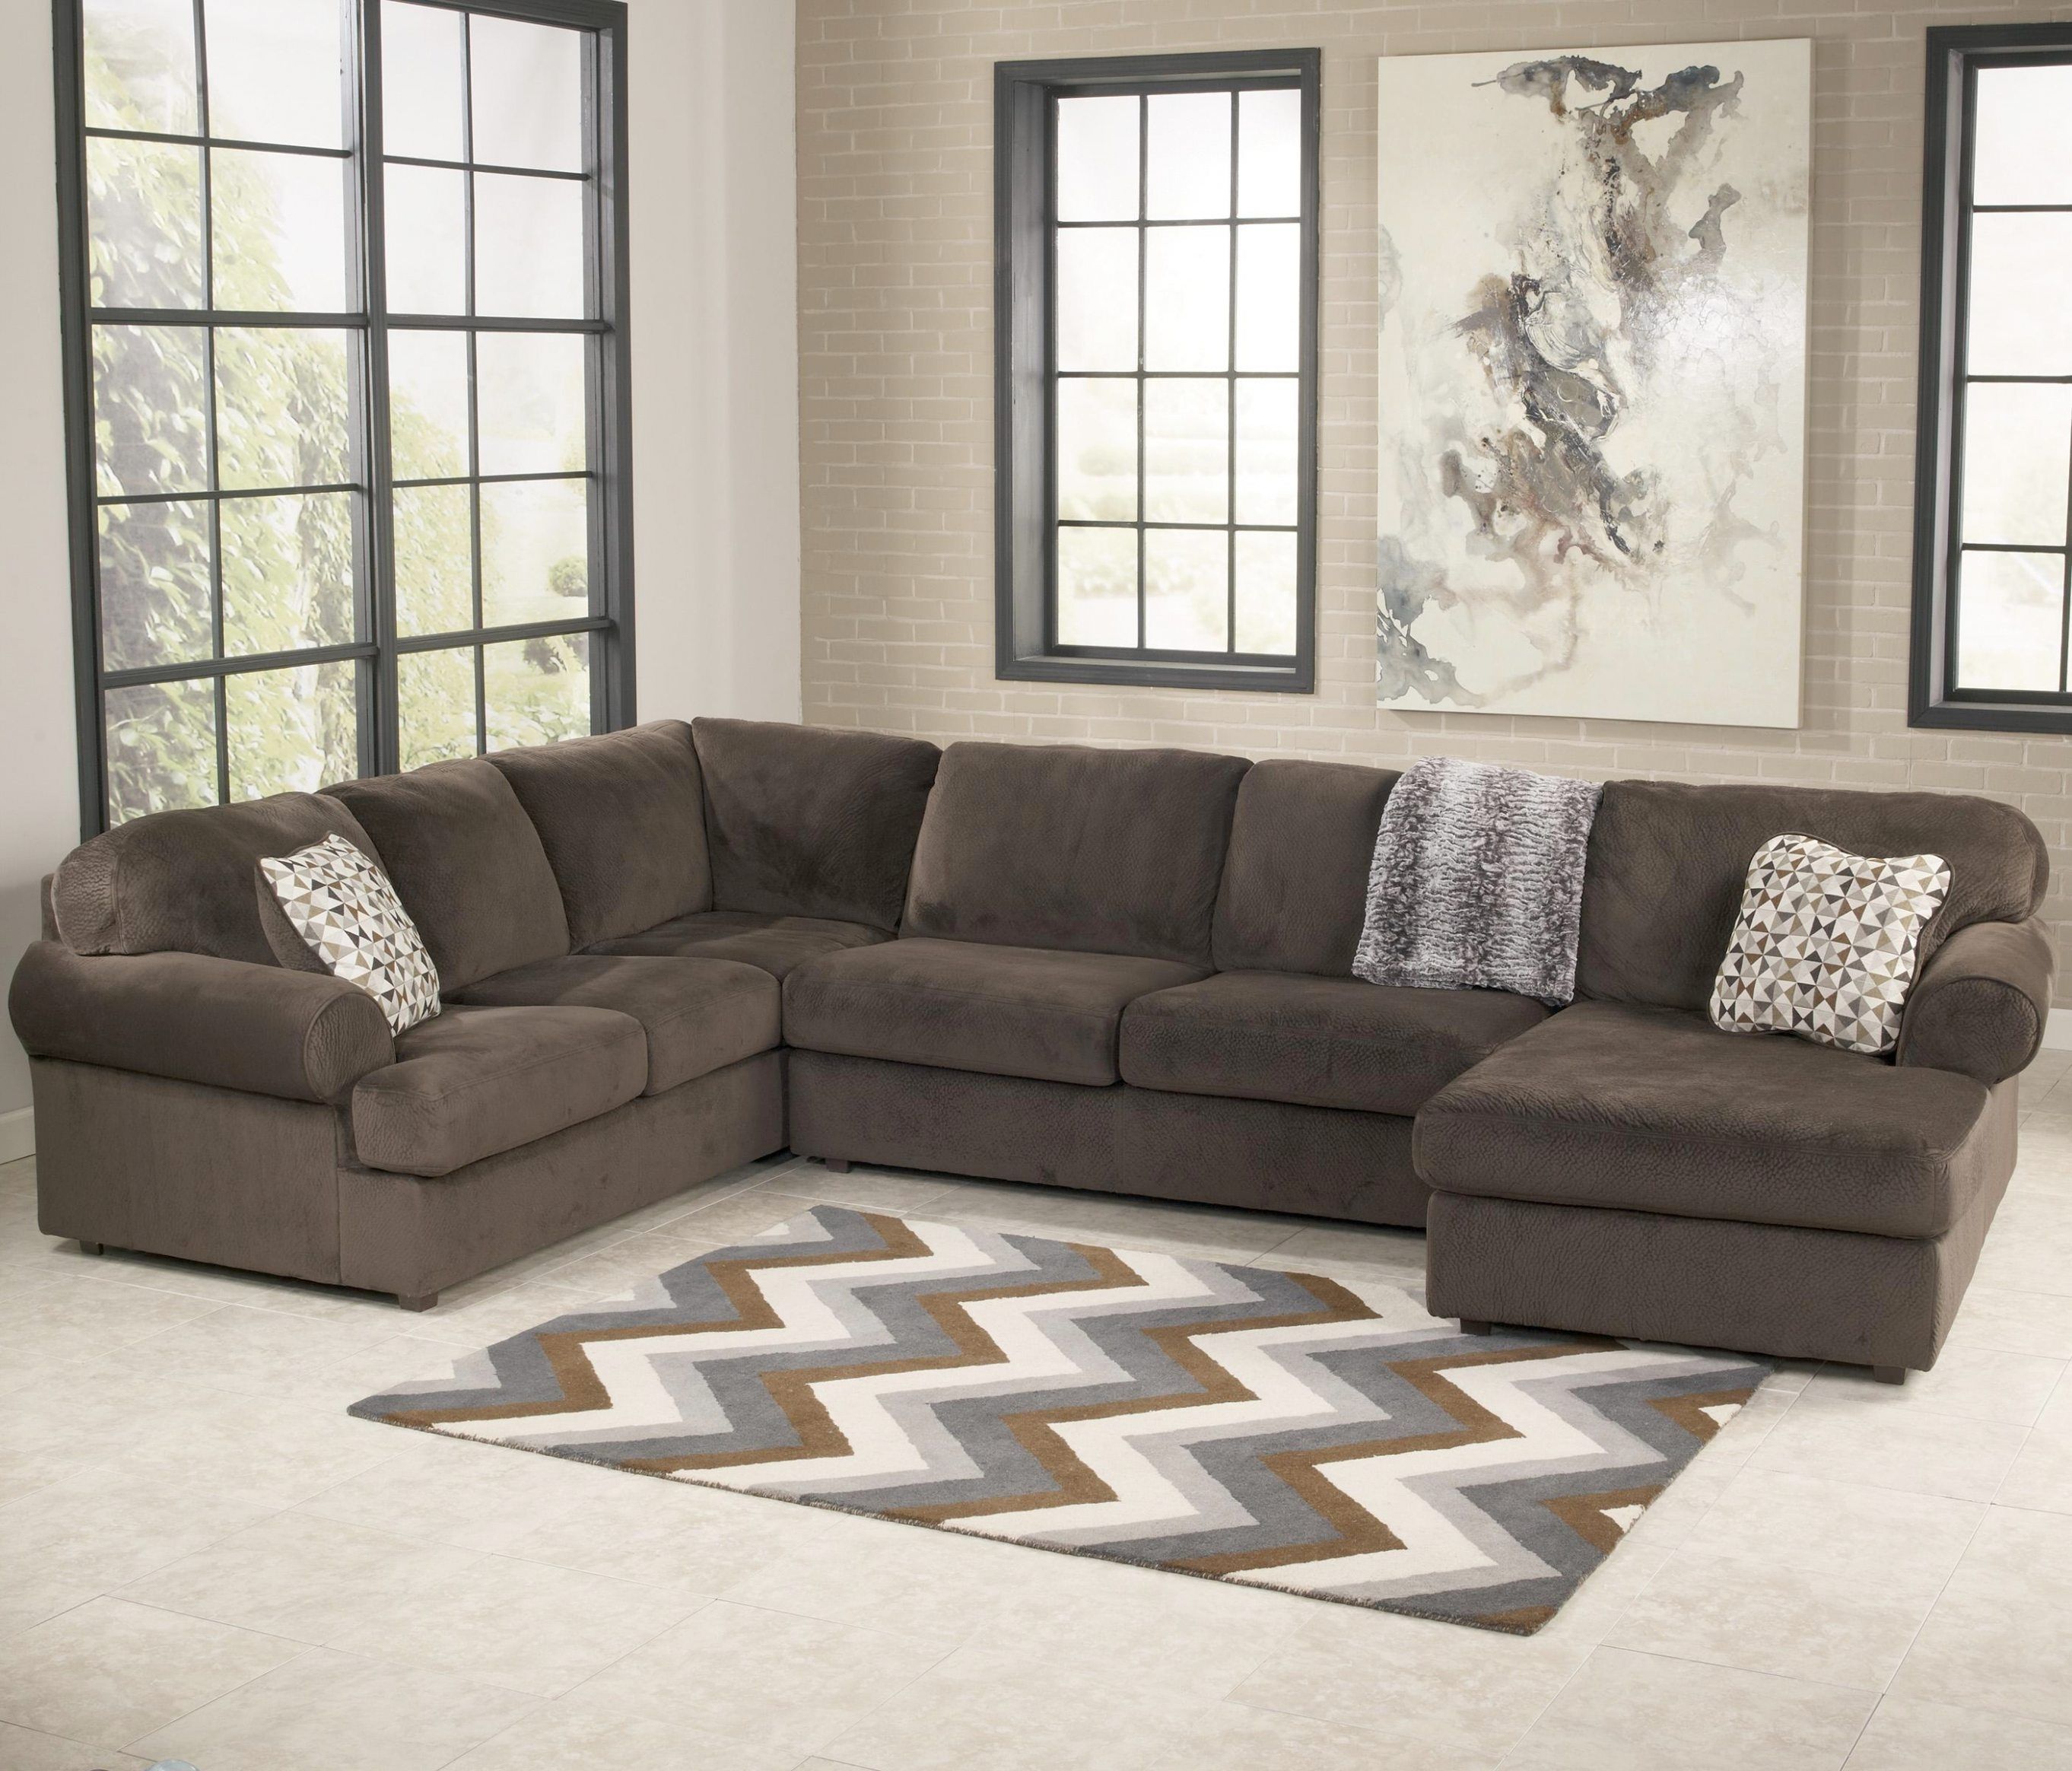 Signature Designashley Jessa Place – Chocolate Sectional Sofa Intended For Green Bay Wi Sectional Sofas (Photo 3 of 10)